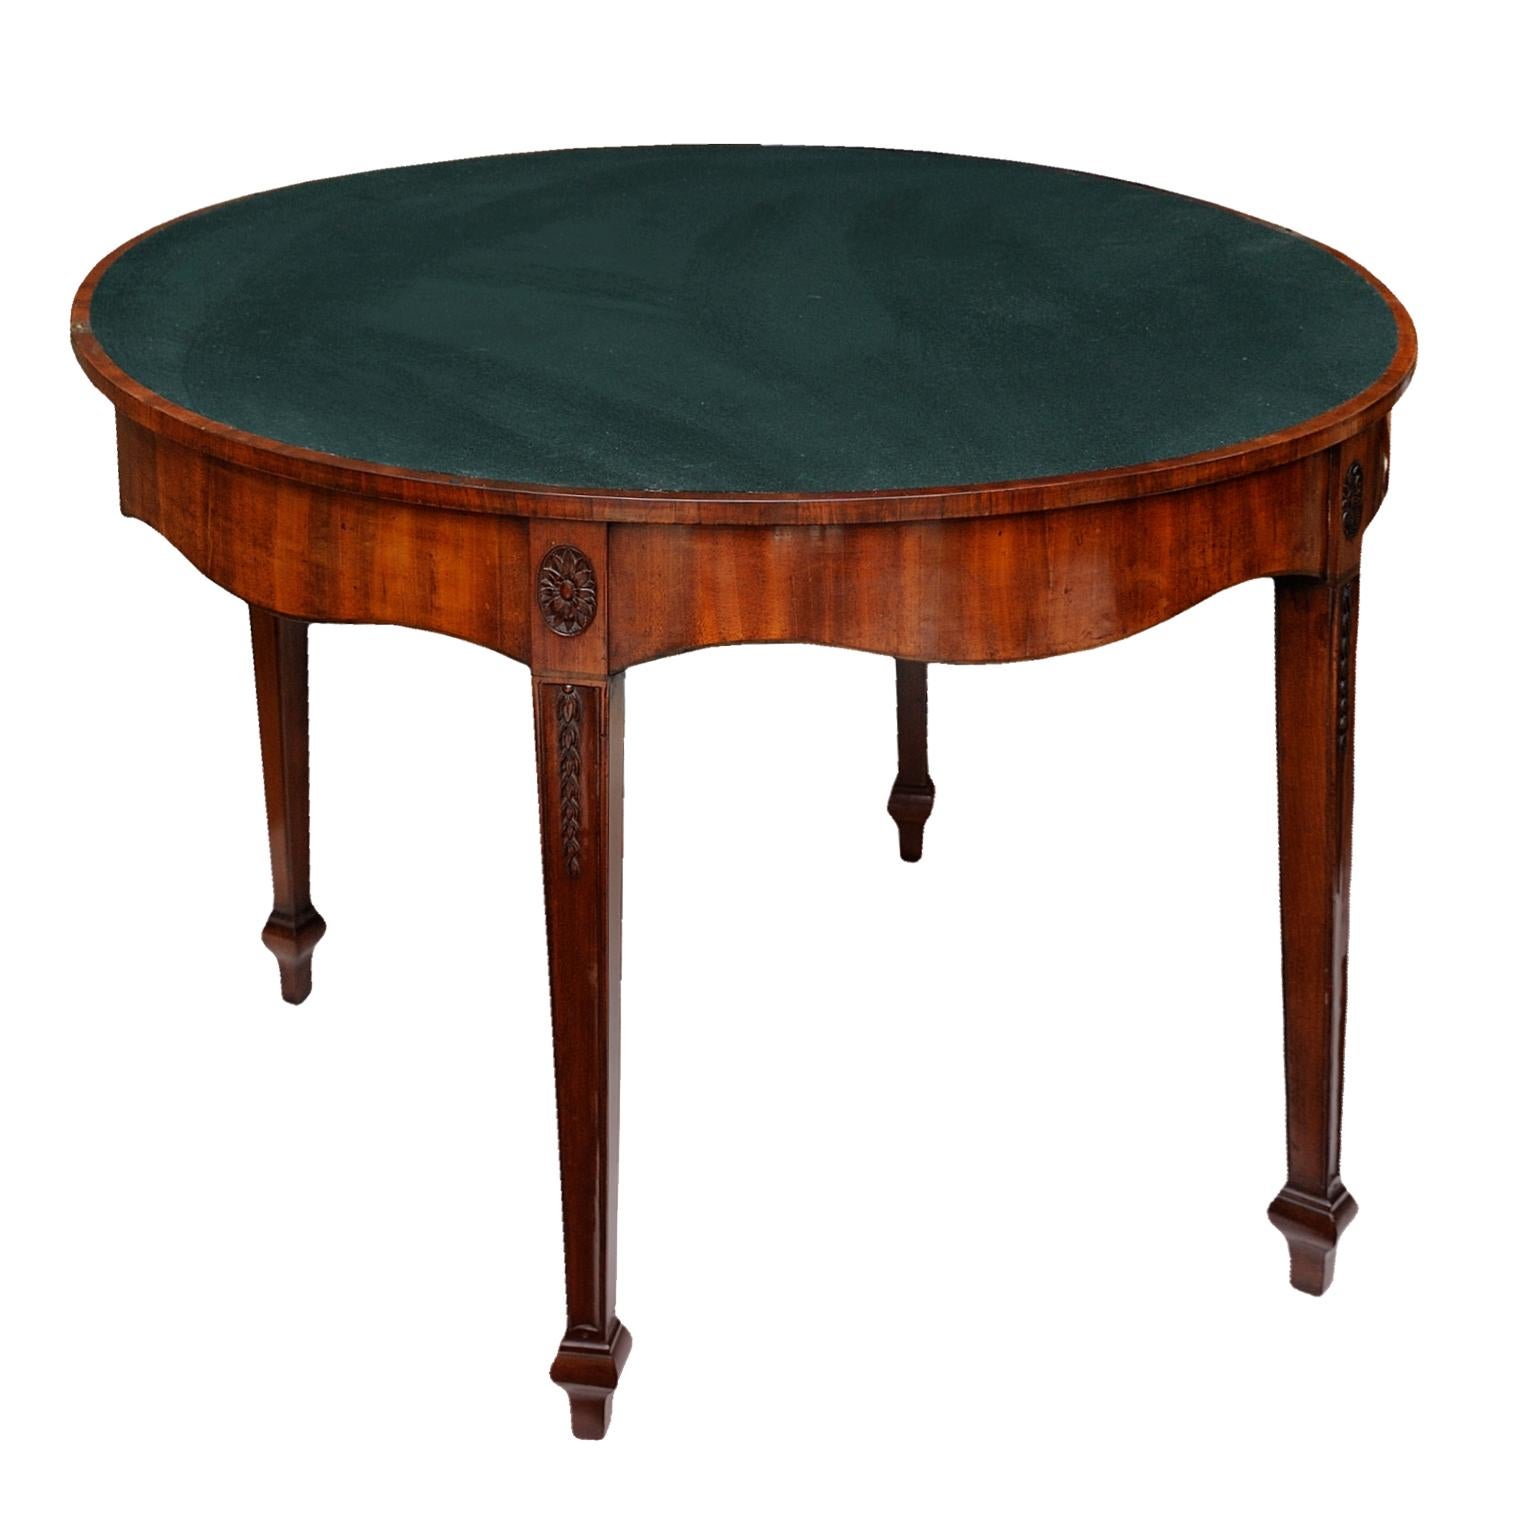 Hepplewhite Period Adam Style Mahogany ​Demilune Card Table, circa 1780 In Good Condition For Sale In Tetbury, Gloucestershire